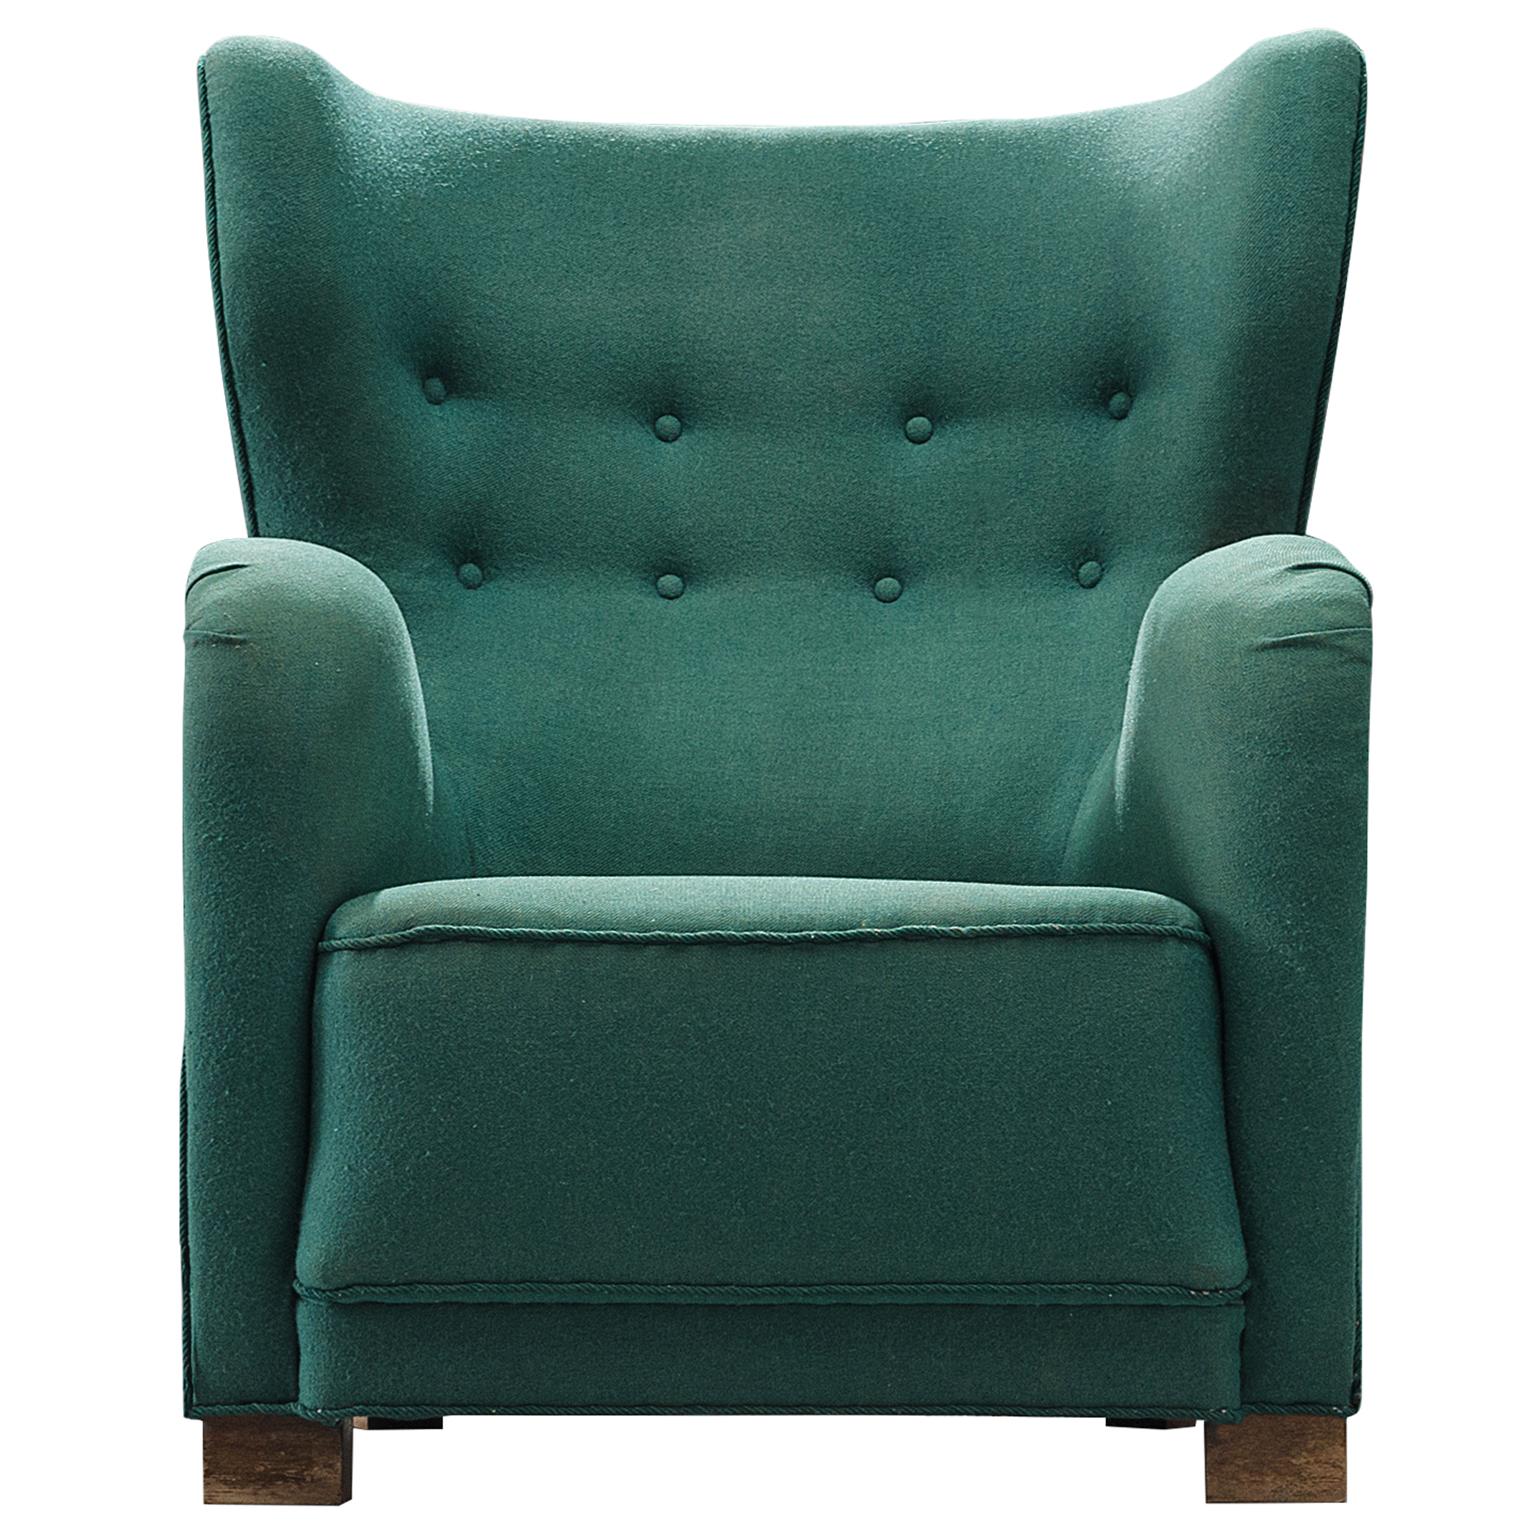 Wingback lounge chair, made with green wool and wooden blocks, Denmark, 1940s. 

The chair has a high wingback which features green upholstery with two rows of buttons on the top and sturdy block wooden legs. When seen from the front the chairs